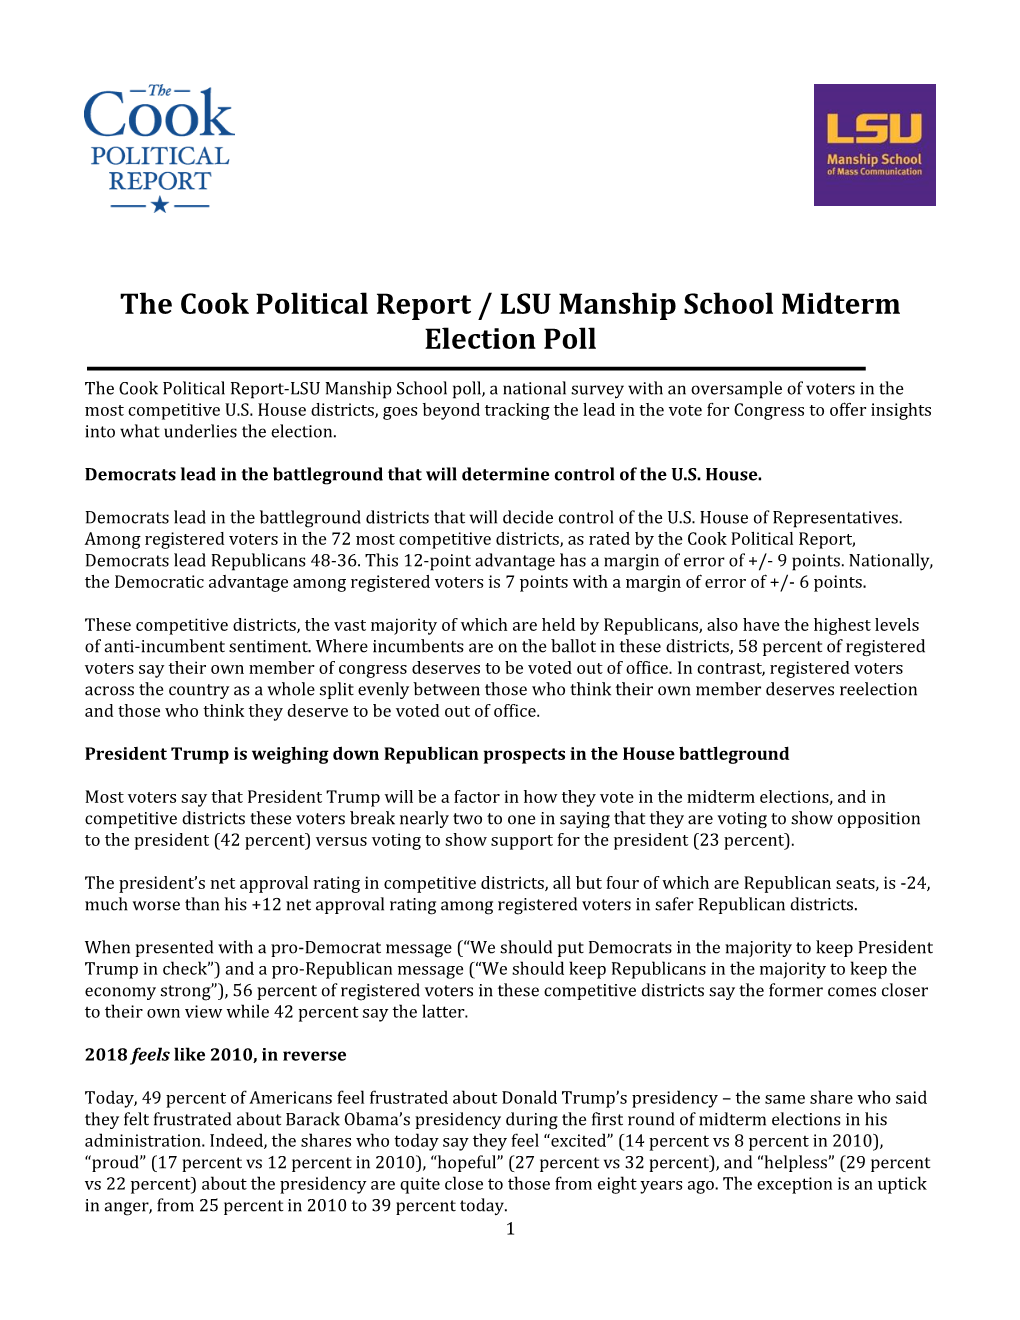 The Cook Political Report / LSU Manship School Midterm Election Poll